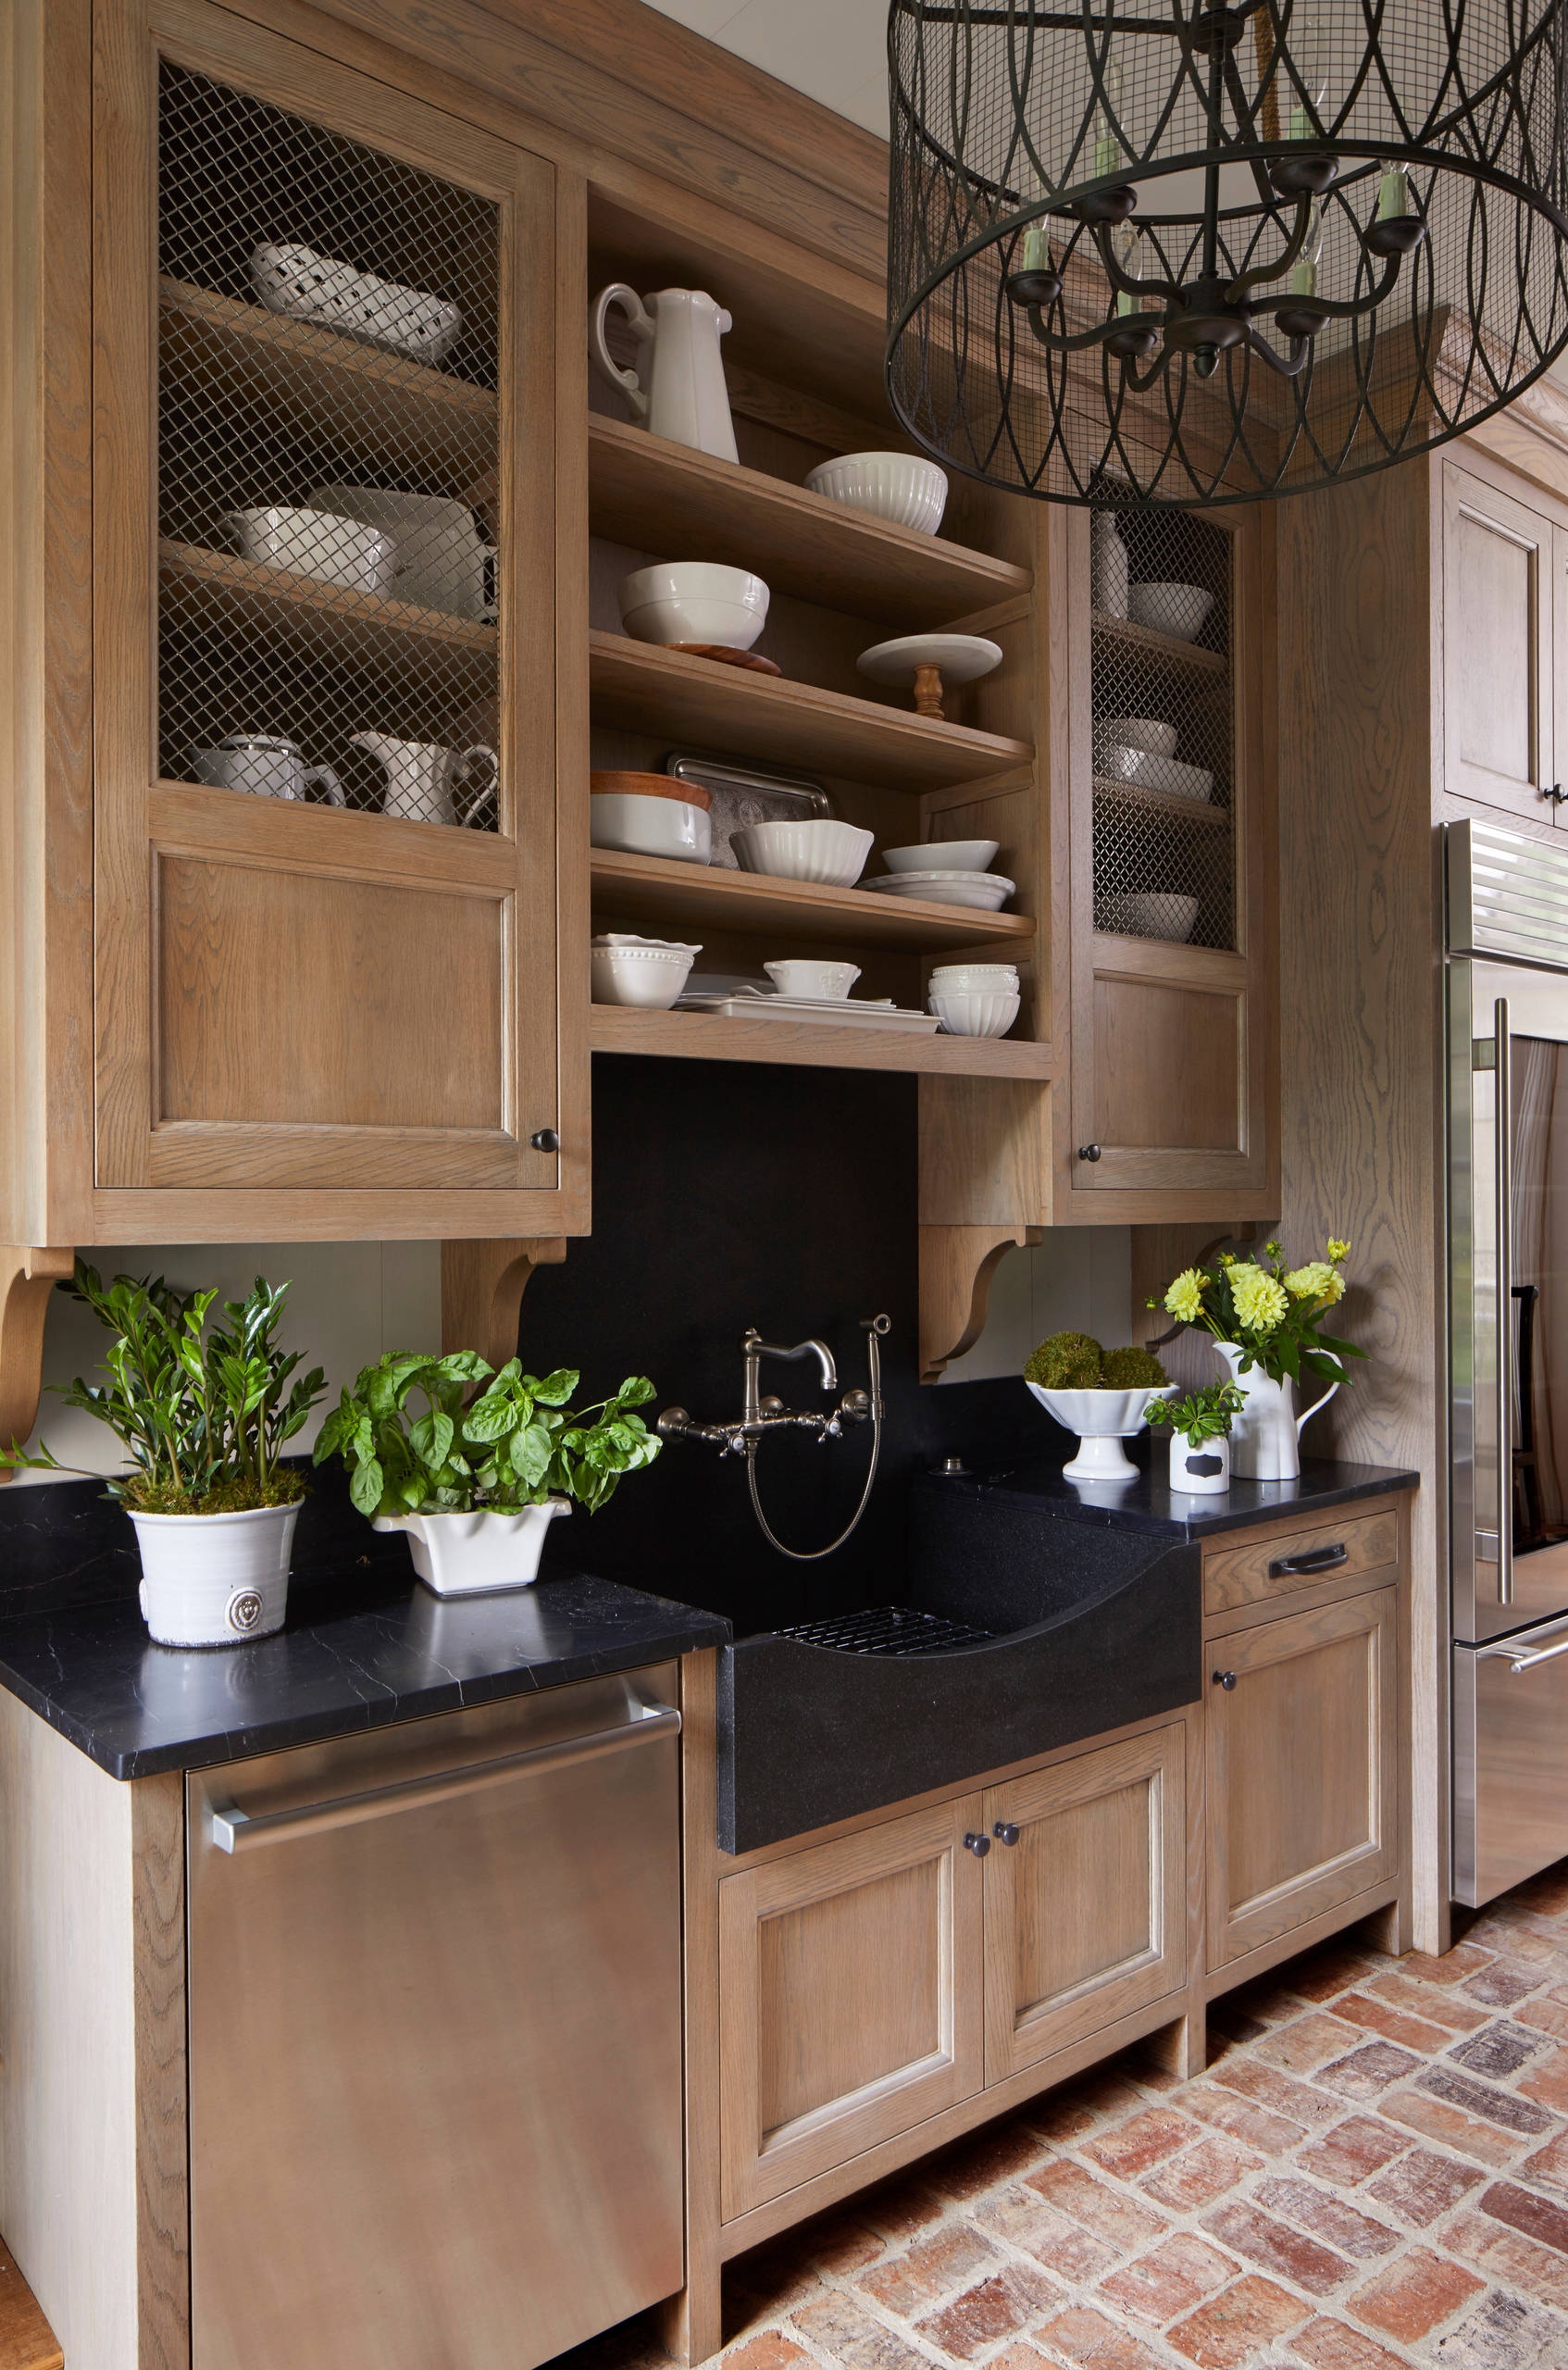 https://foter.com/photos/424/open-shelving-kitchen-idea-with-closed-storage.jpg